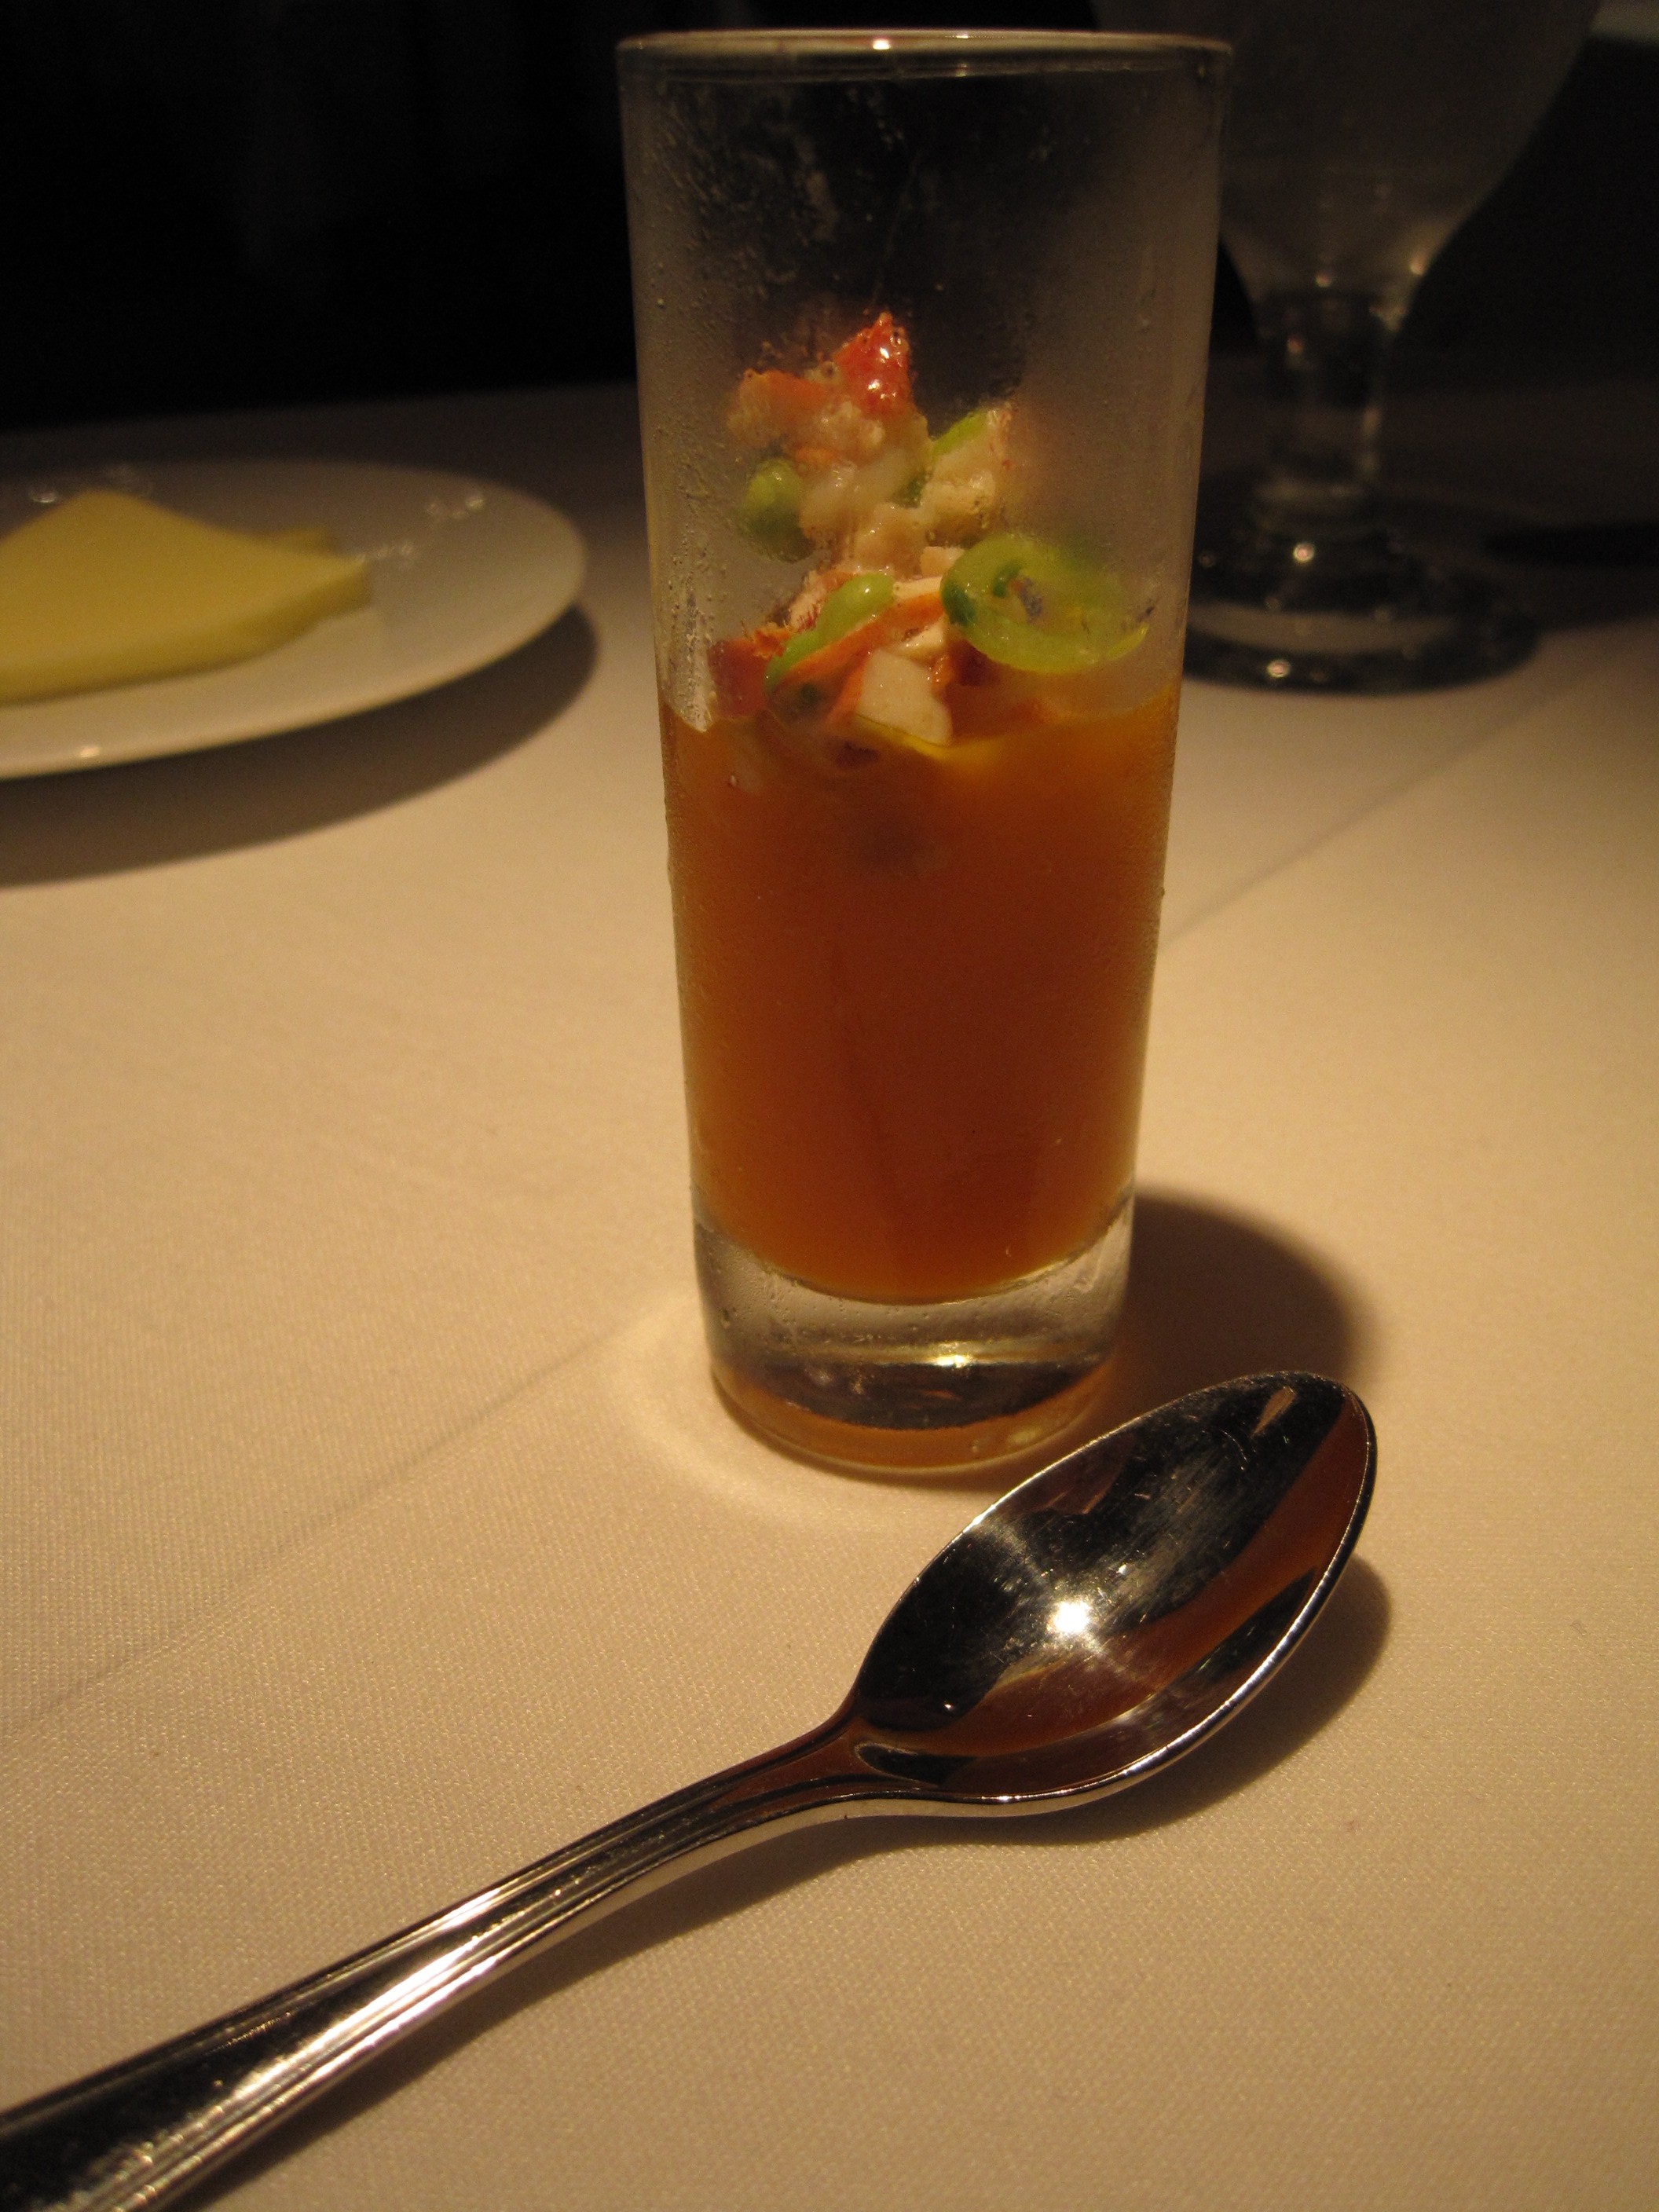 Carrot soup with lobster salad amous-bouche